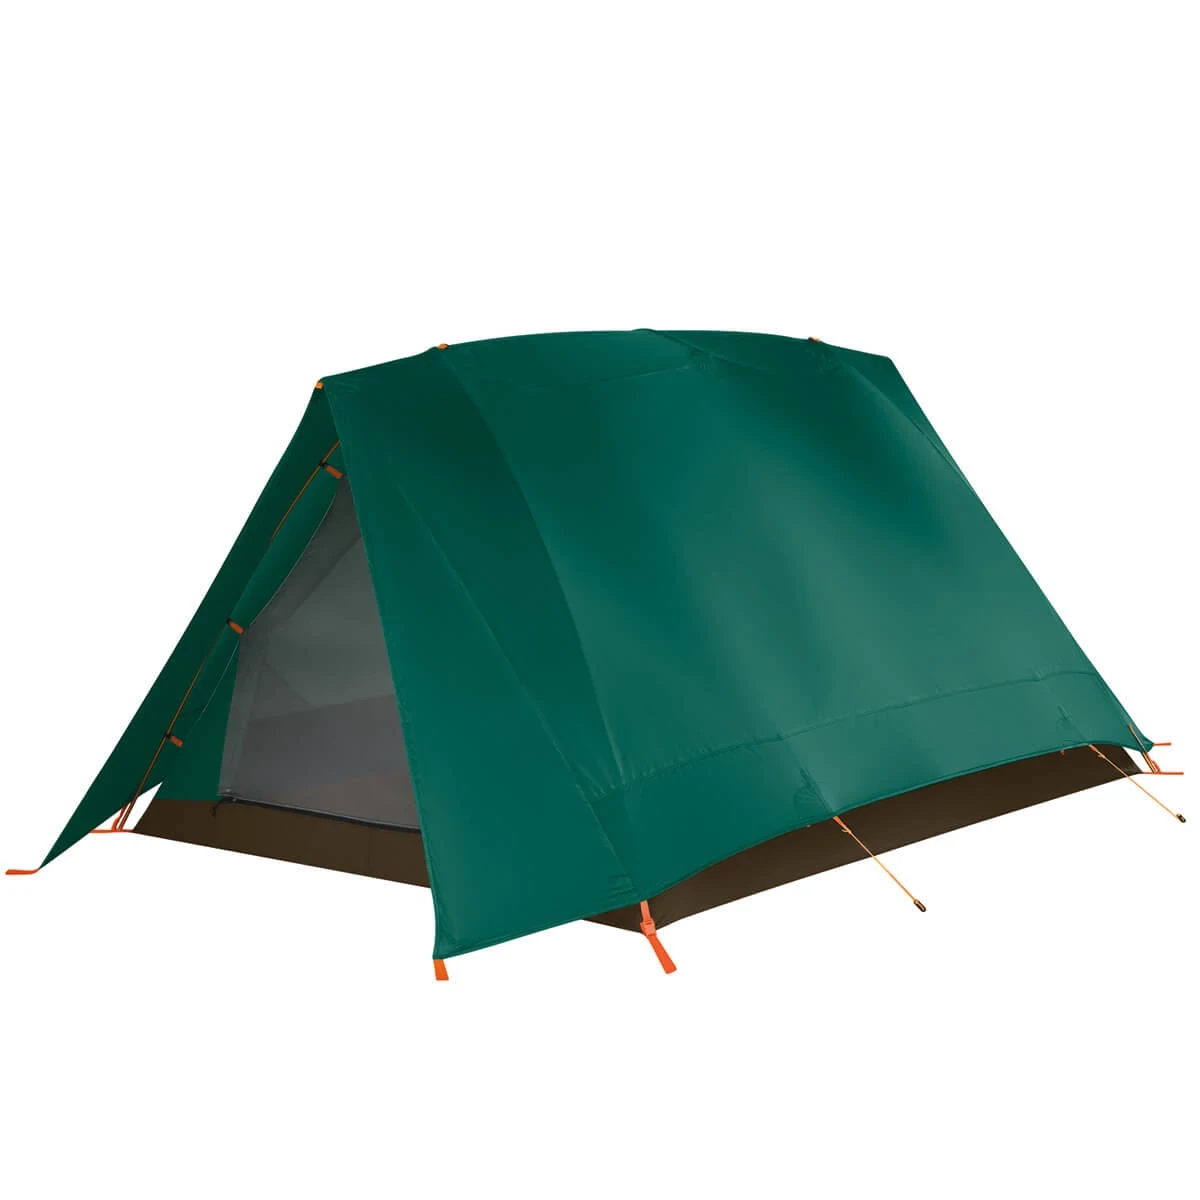 Timberline SQ Outfitter 4 tent with rainfly